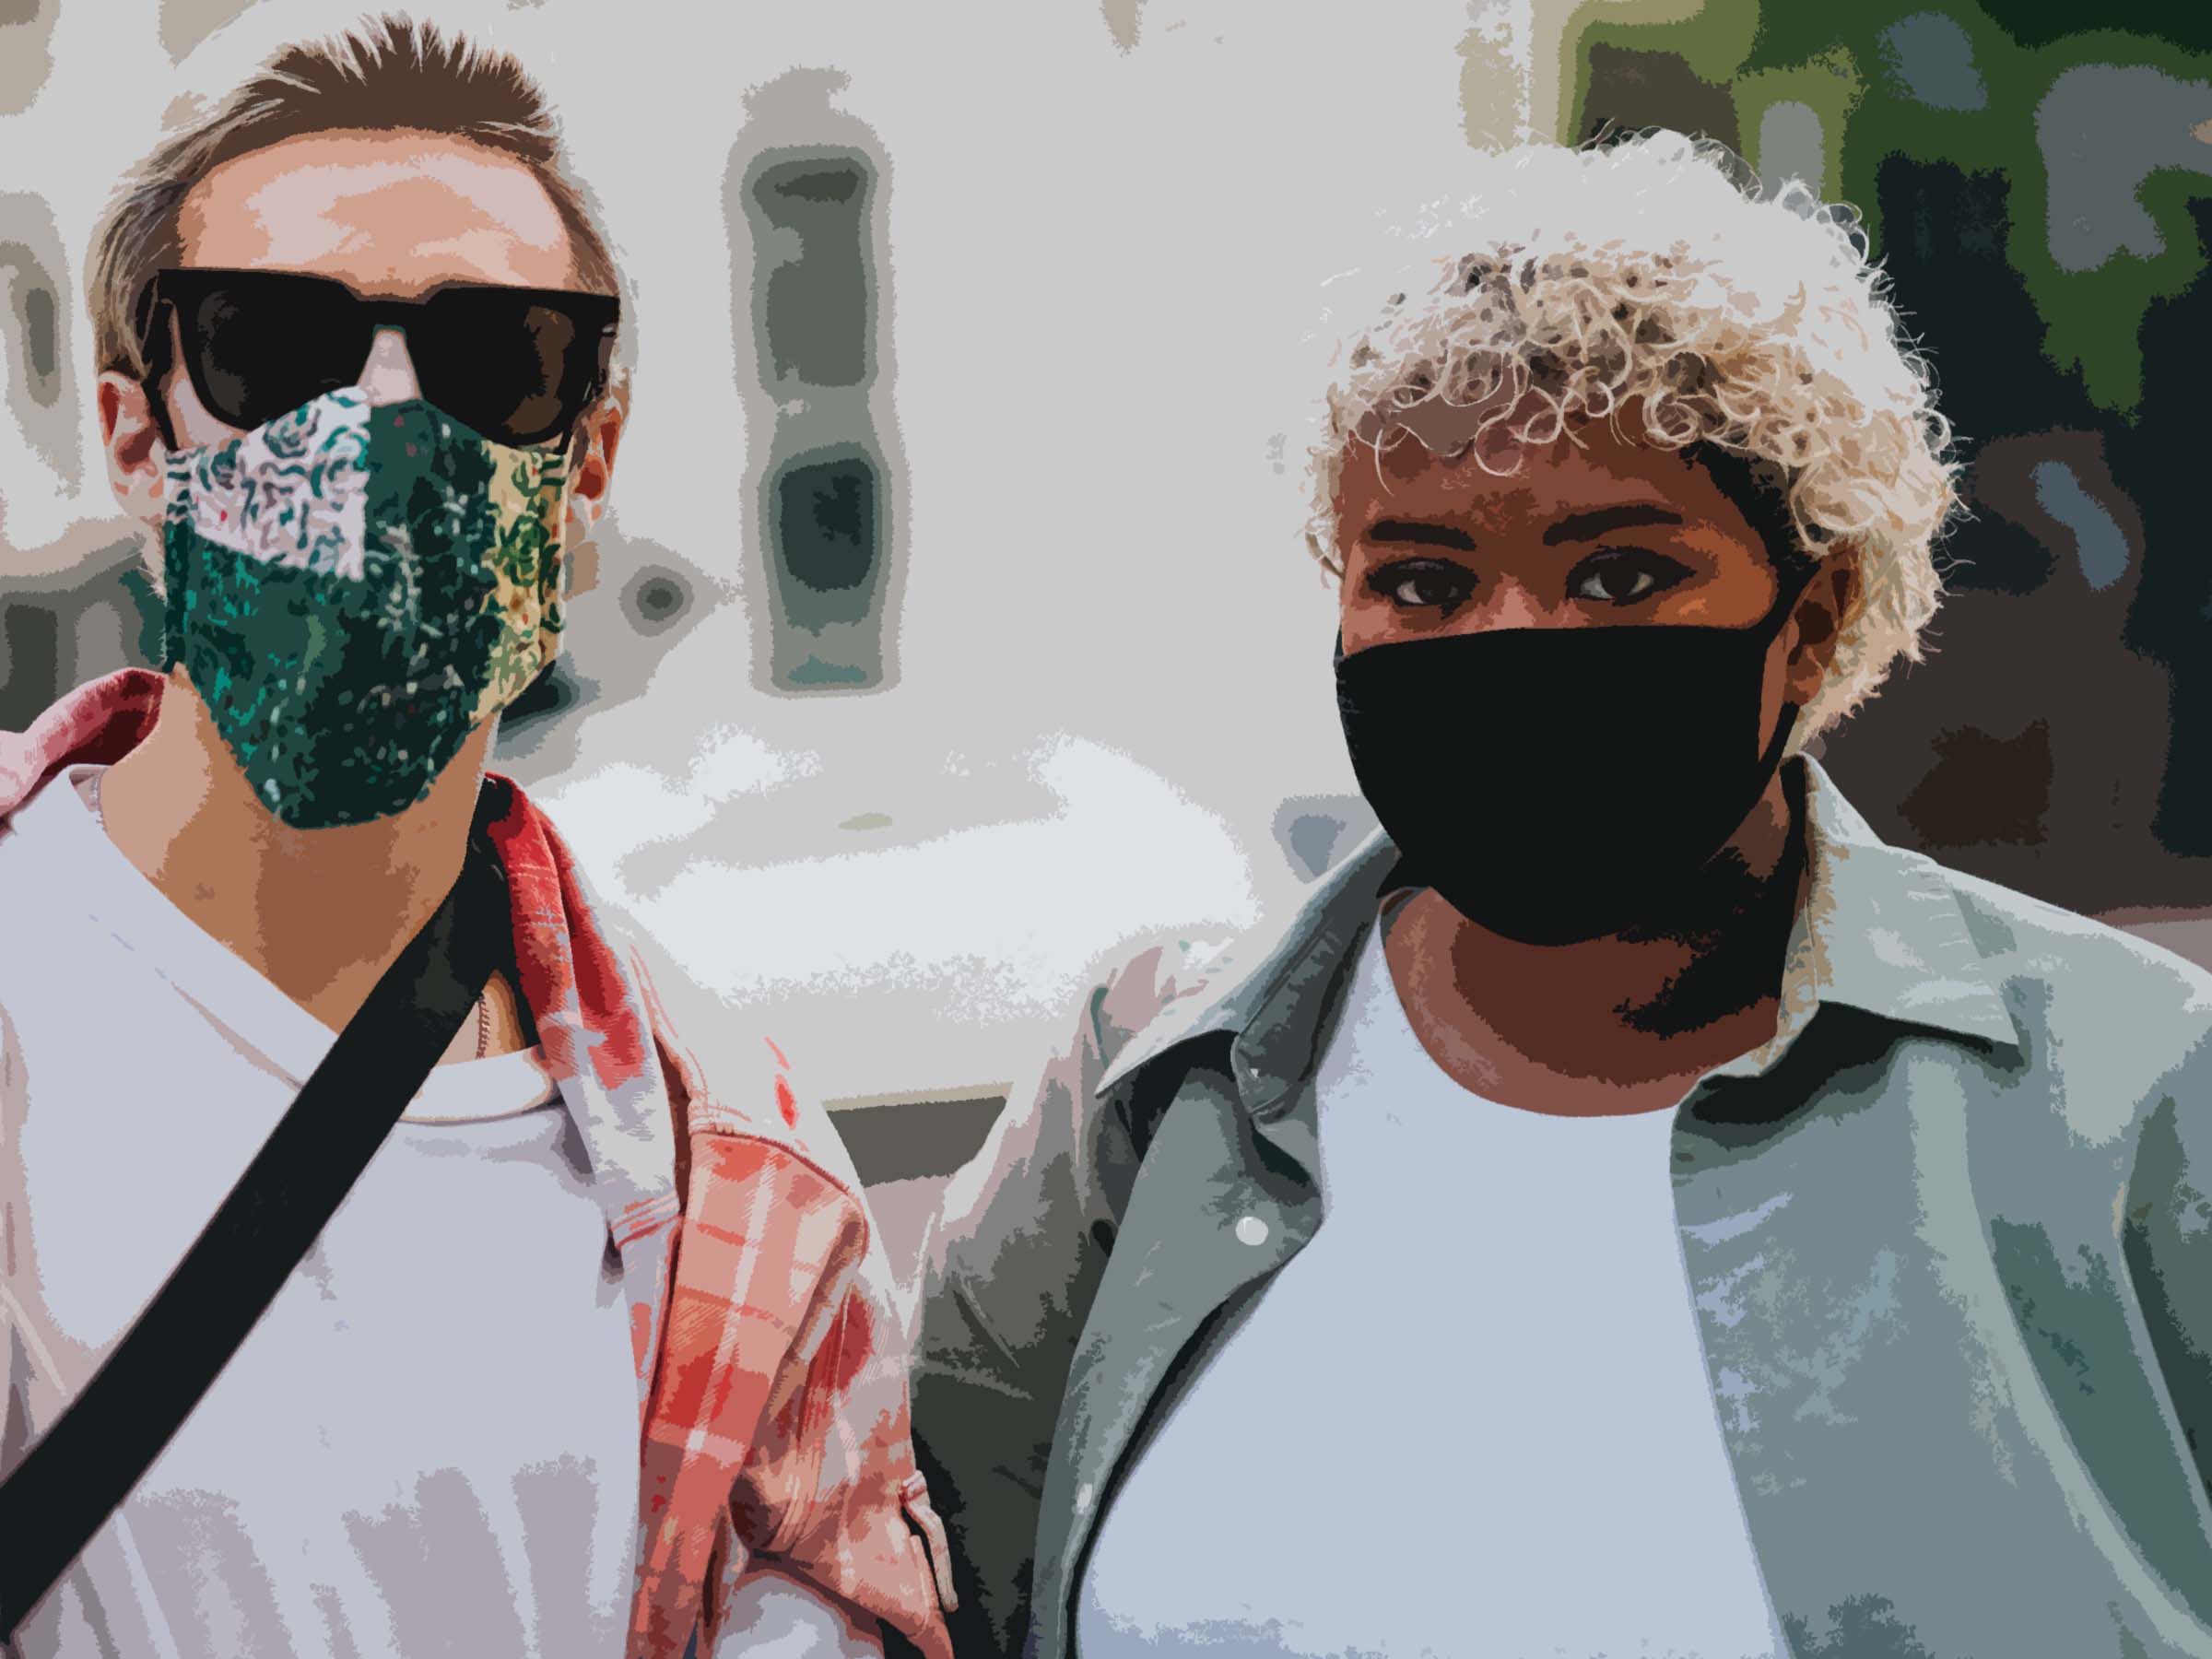 Two young people stand together wearing COVID-19 face masks. On the left is a White man and on the right is a Black woman